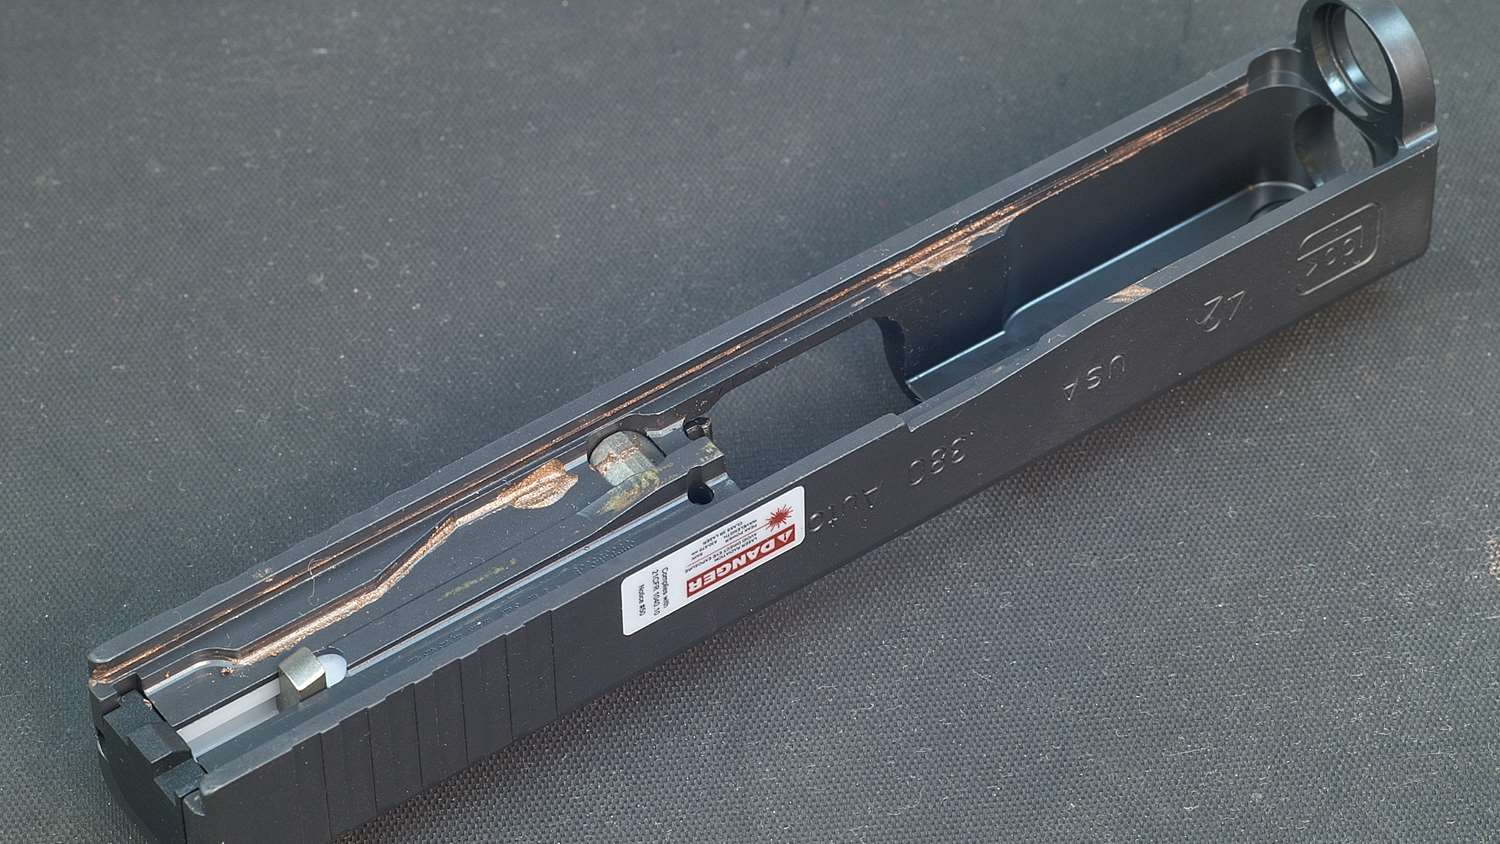 This gun shipped with a copper-based paste lube already in place. Glock was wise to pre-lube the gun, just in case one of those ninja unboxers gets a hold of it.